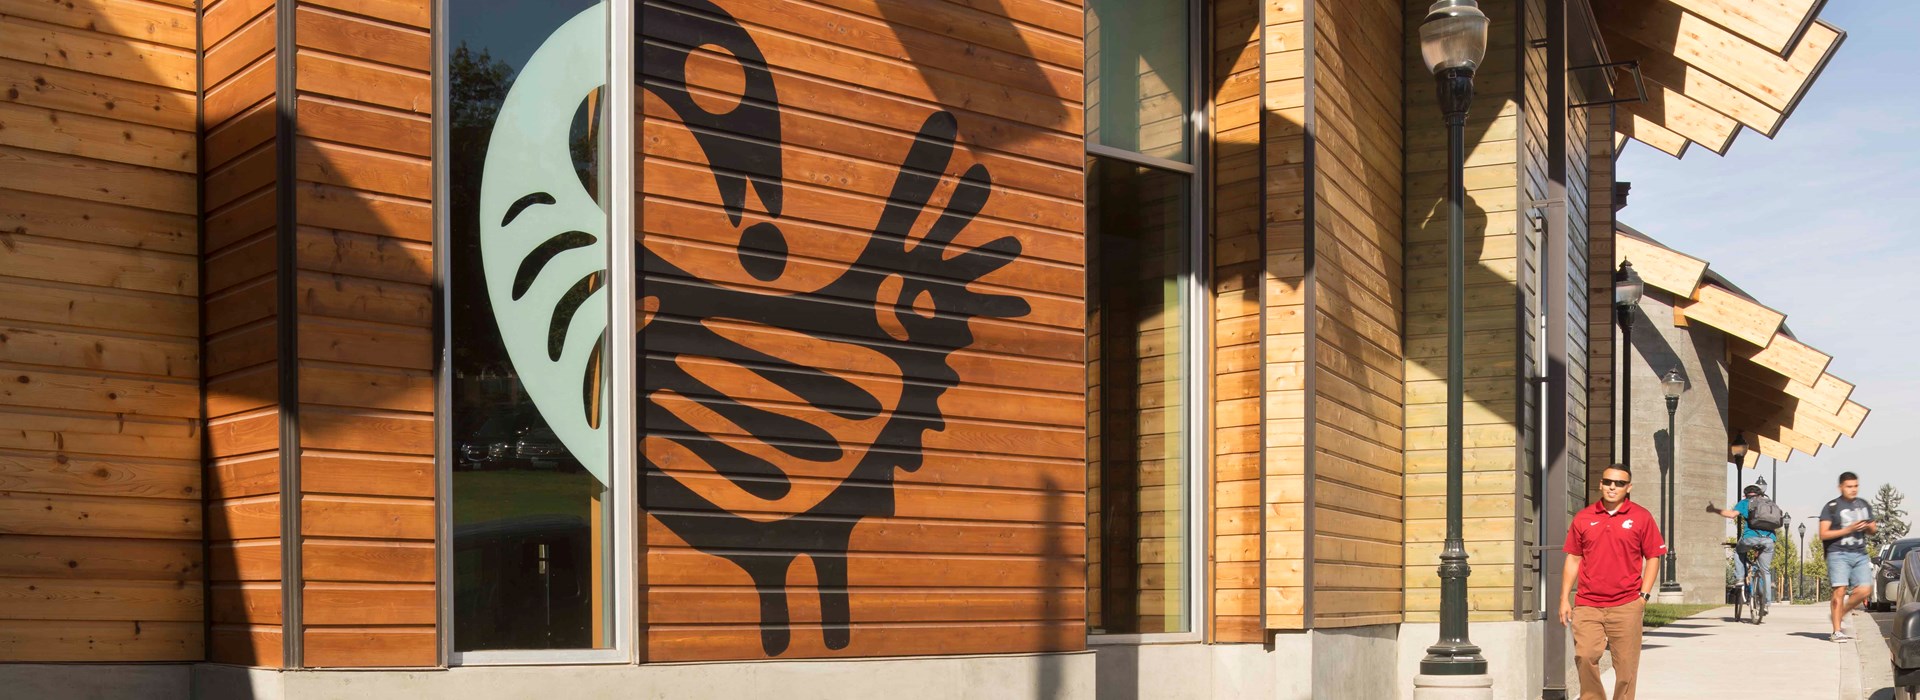 Sankofa icon on the exterior of the cultural center